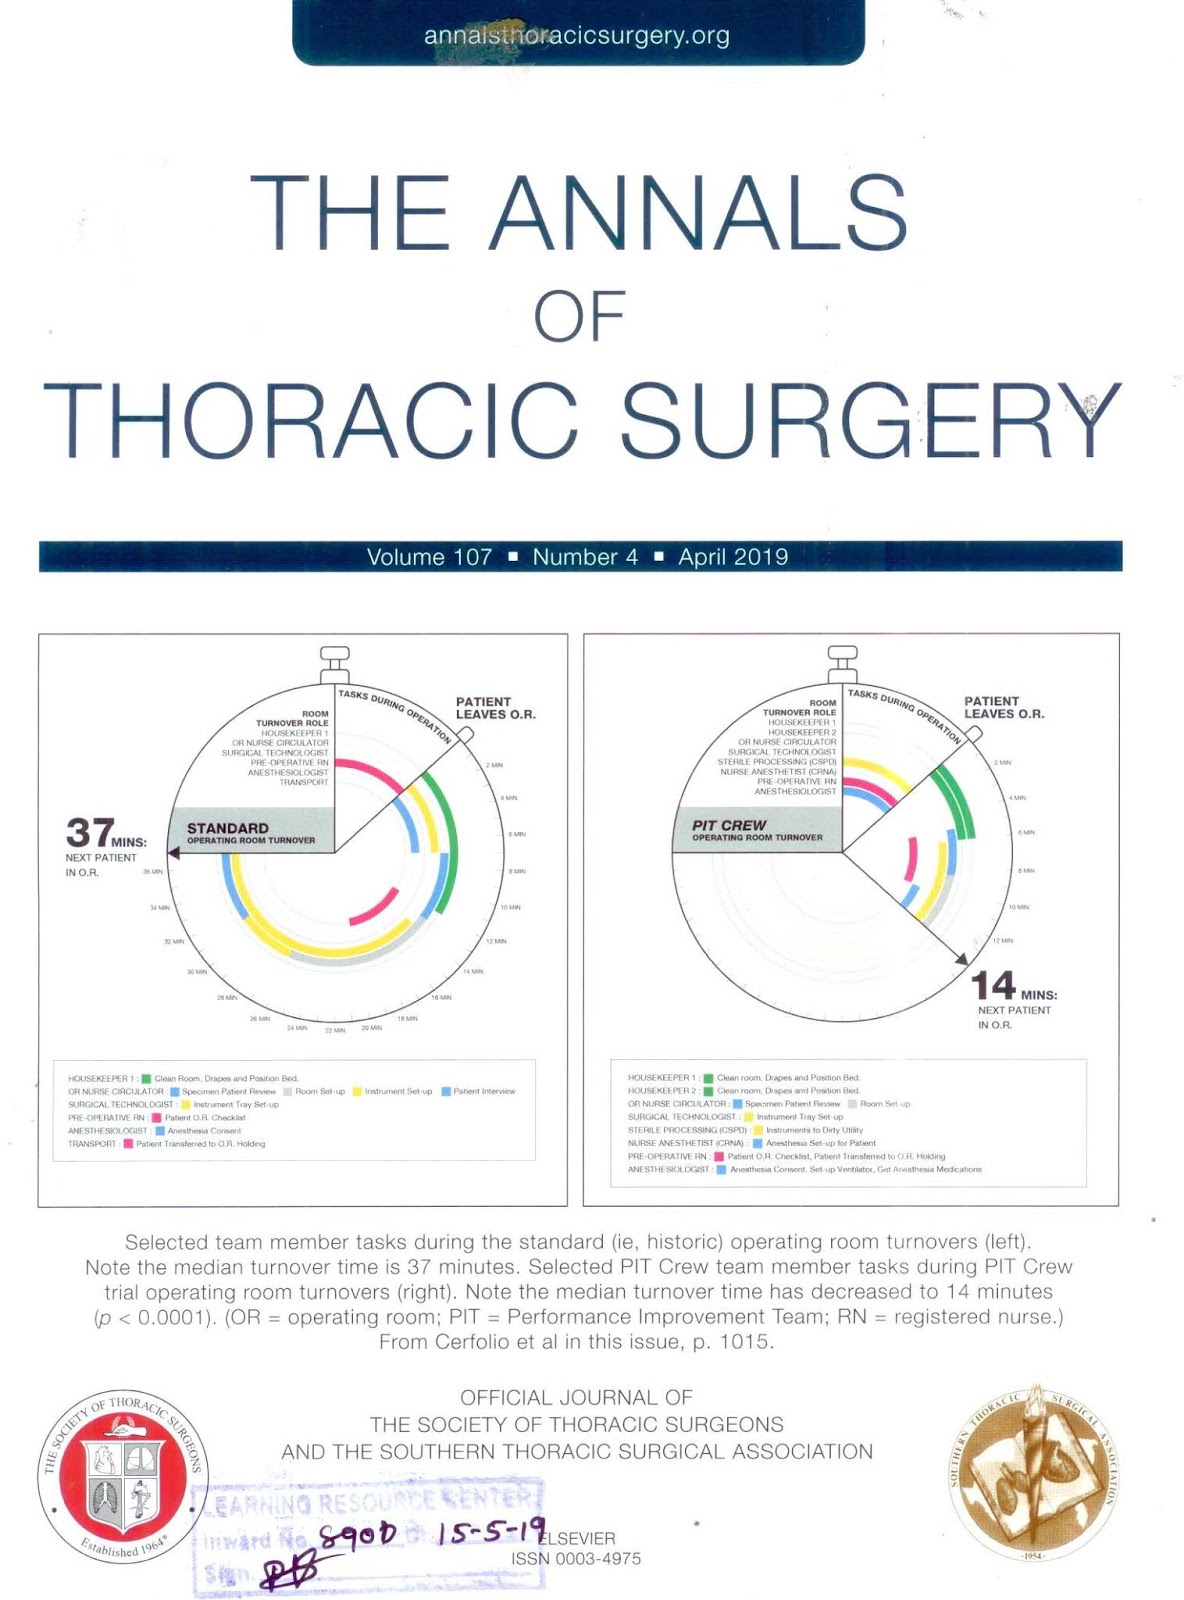 https://www.annalsthoracicsurgery.org/issue/S0003-4975(18)X0015-0